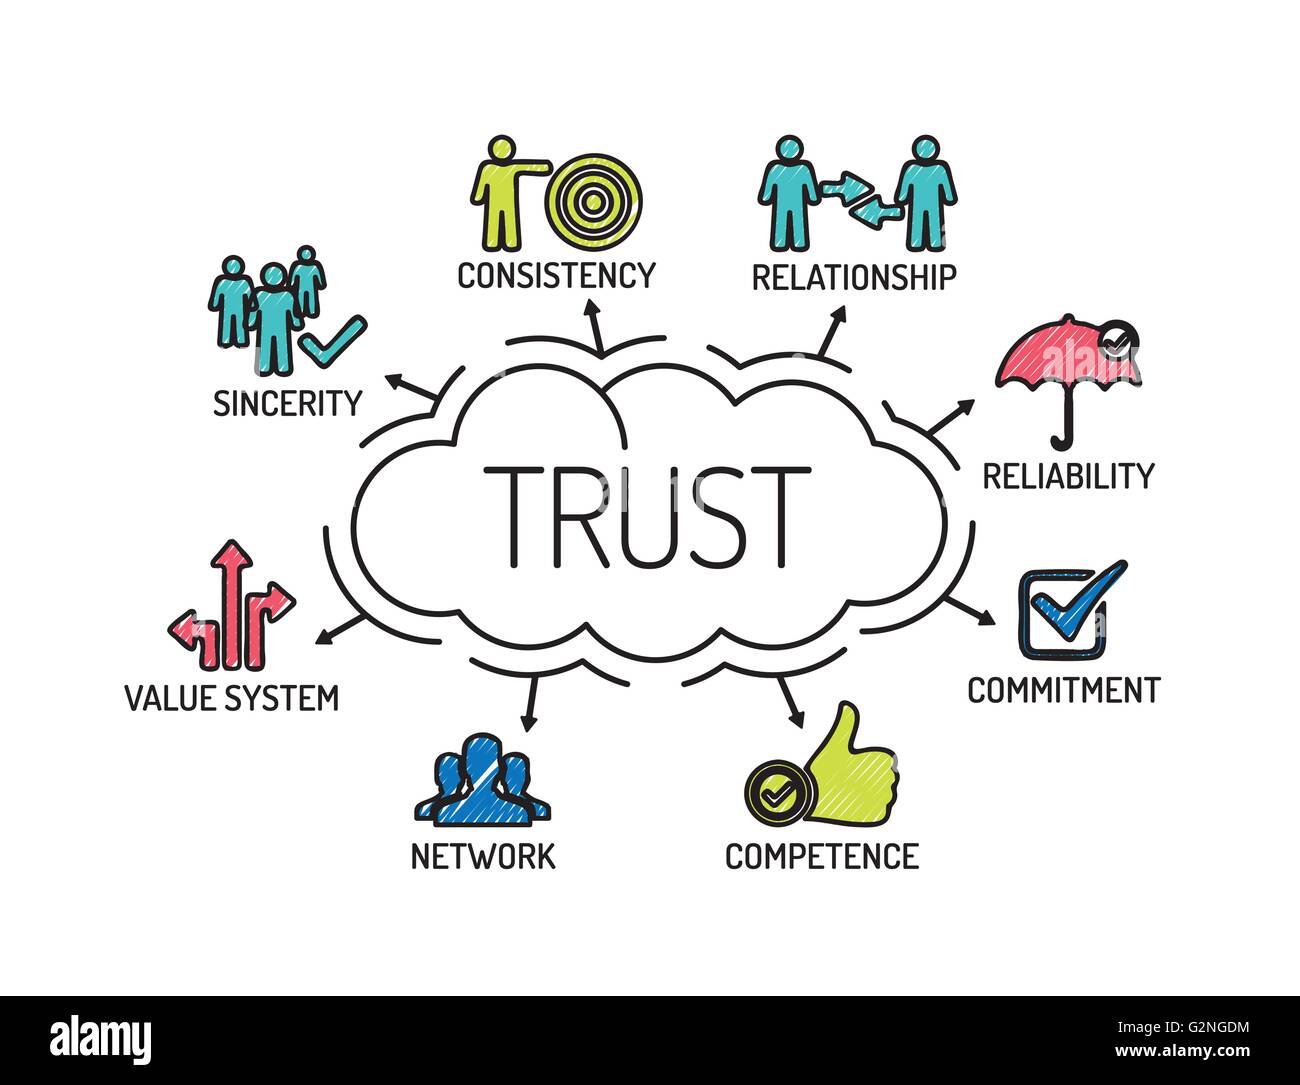 Trust. Chart with keywords and icons. Sketch Stock Vector